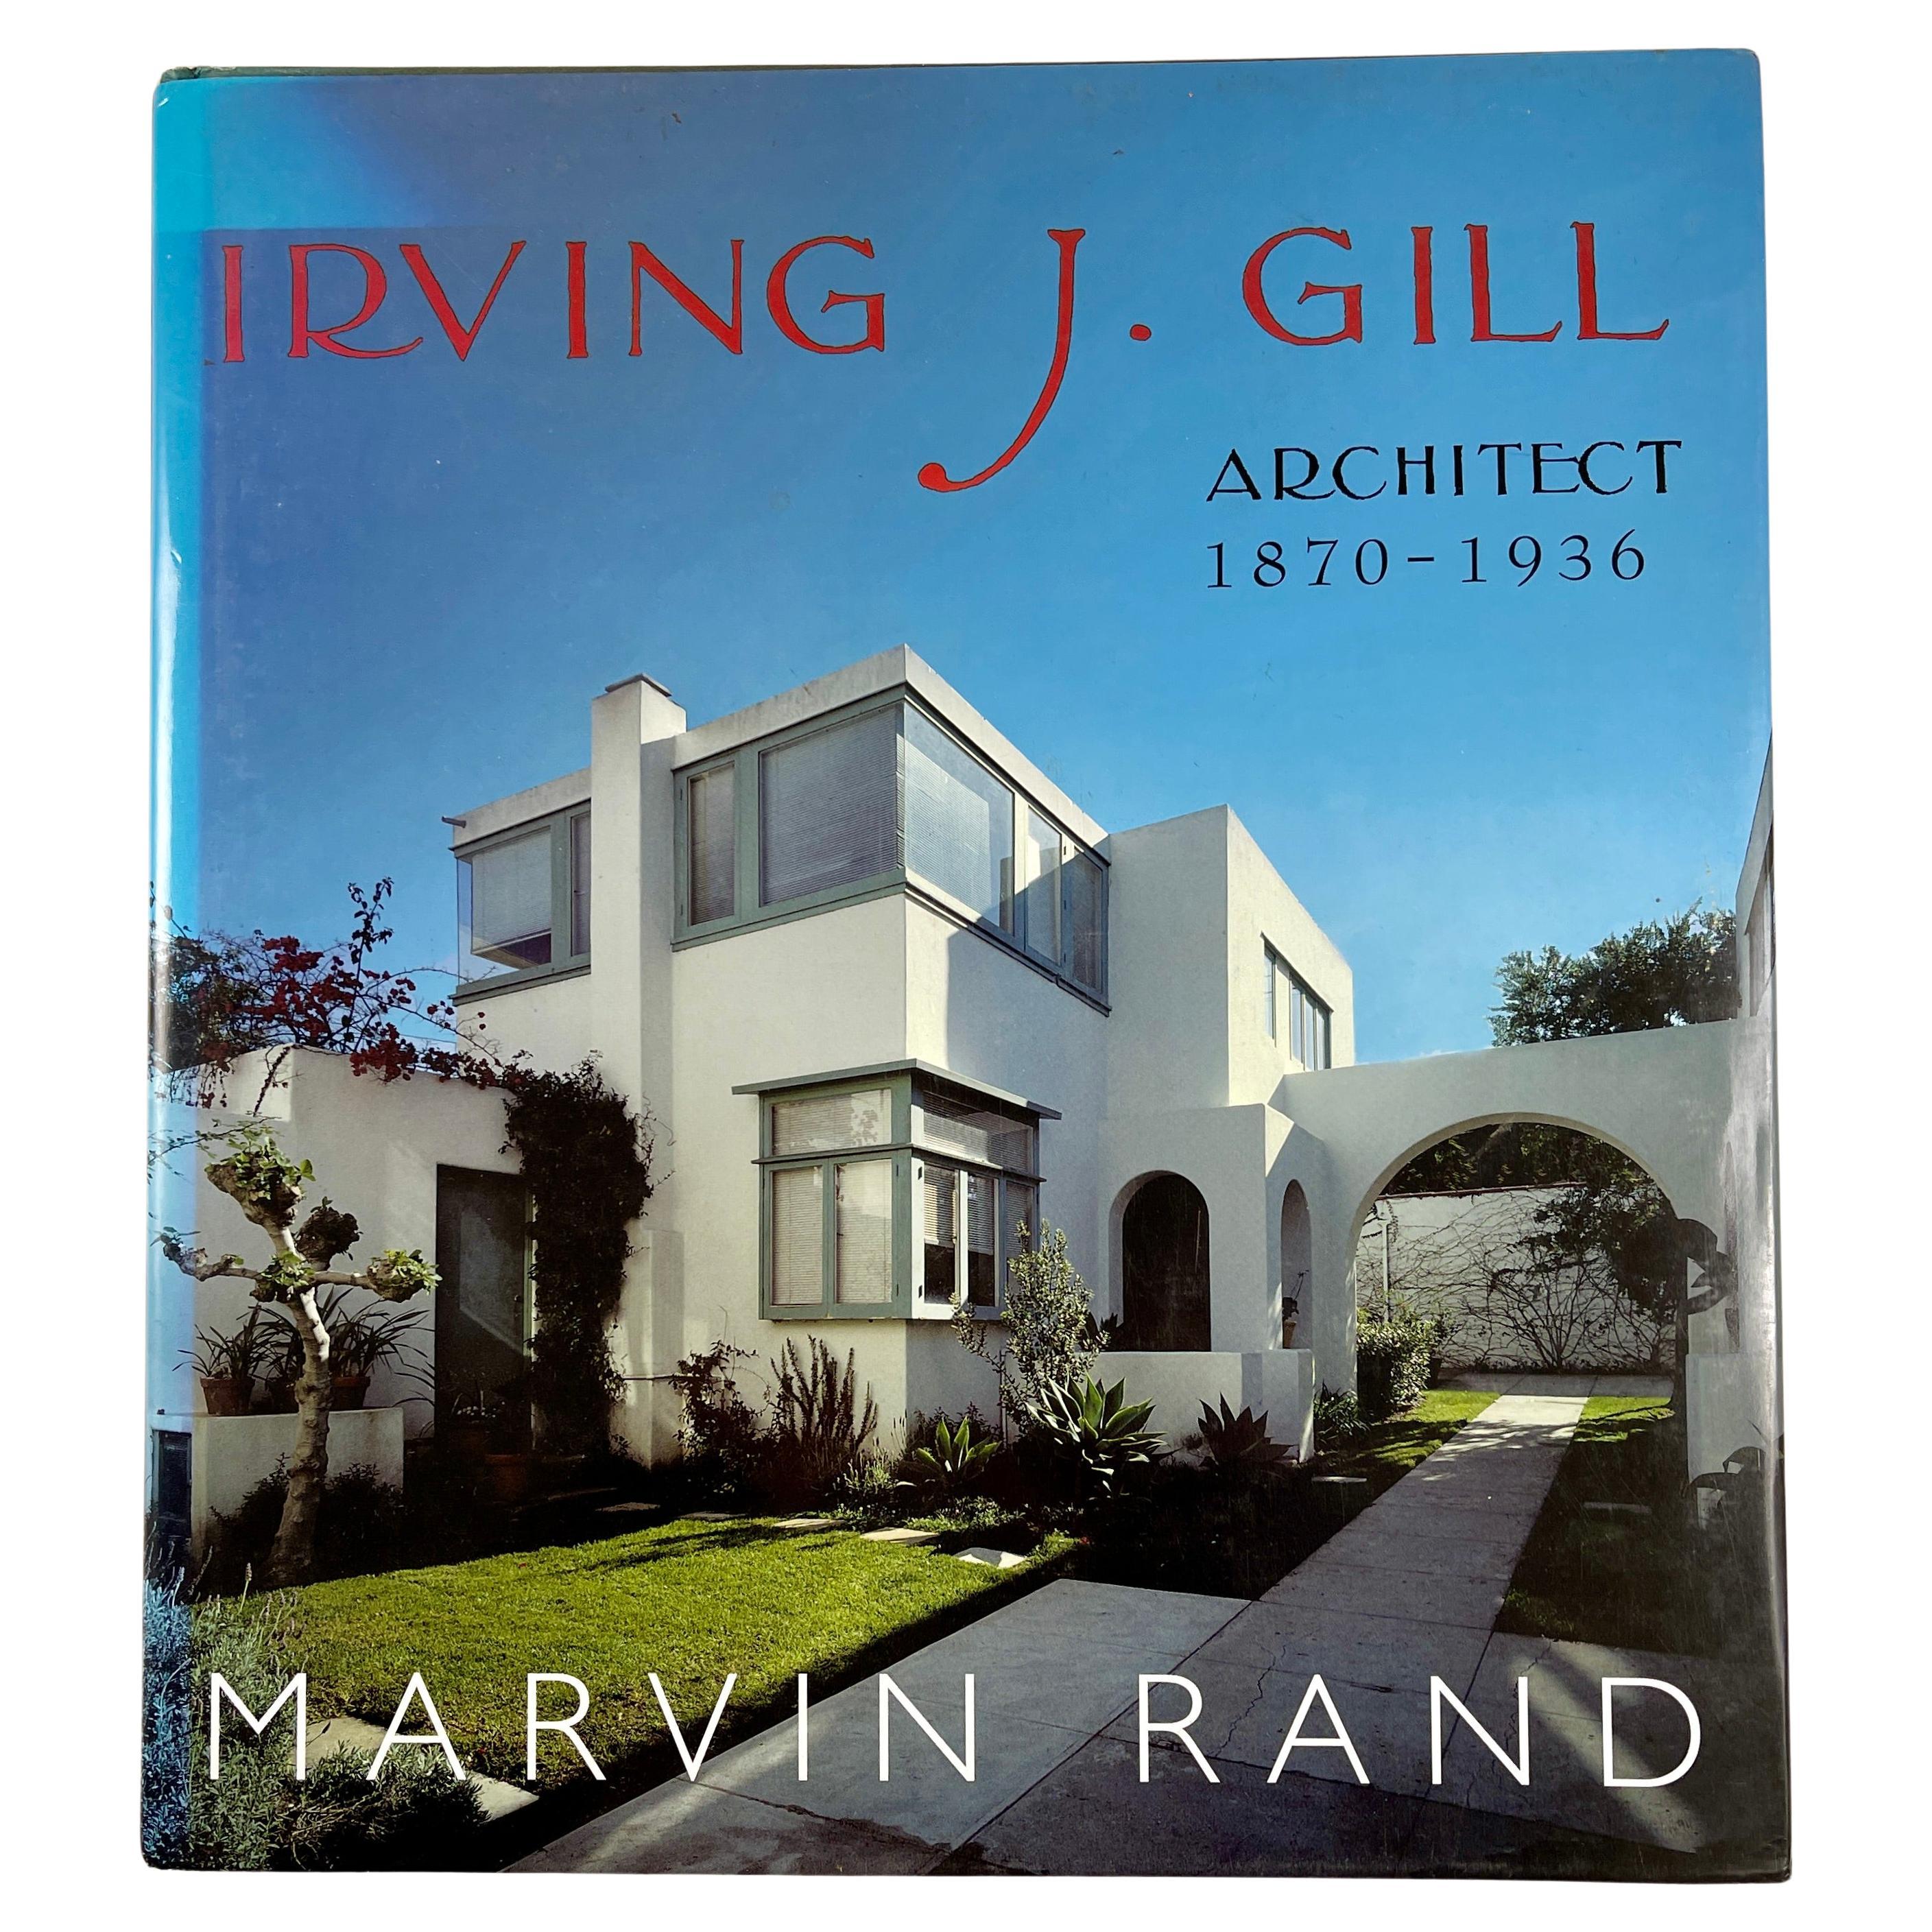 Irving J. Gill: Architect, California Architecture, Hardcoverbuch, 2006